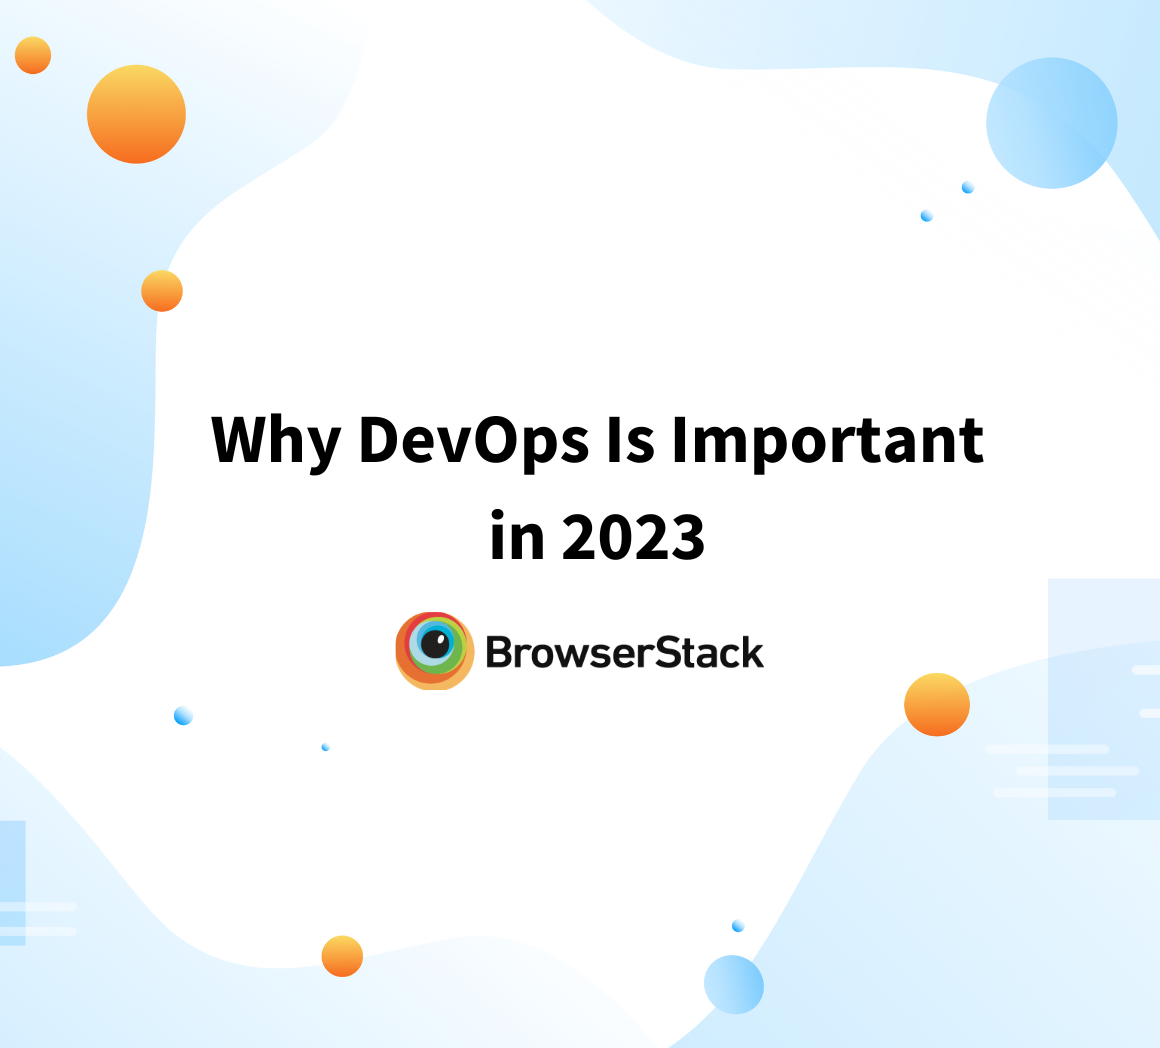 Why DevOps Is Important in 2023